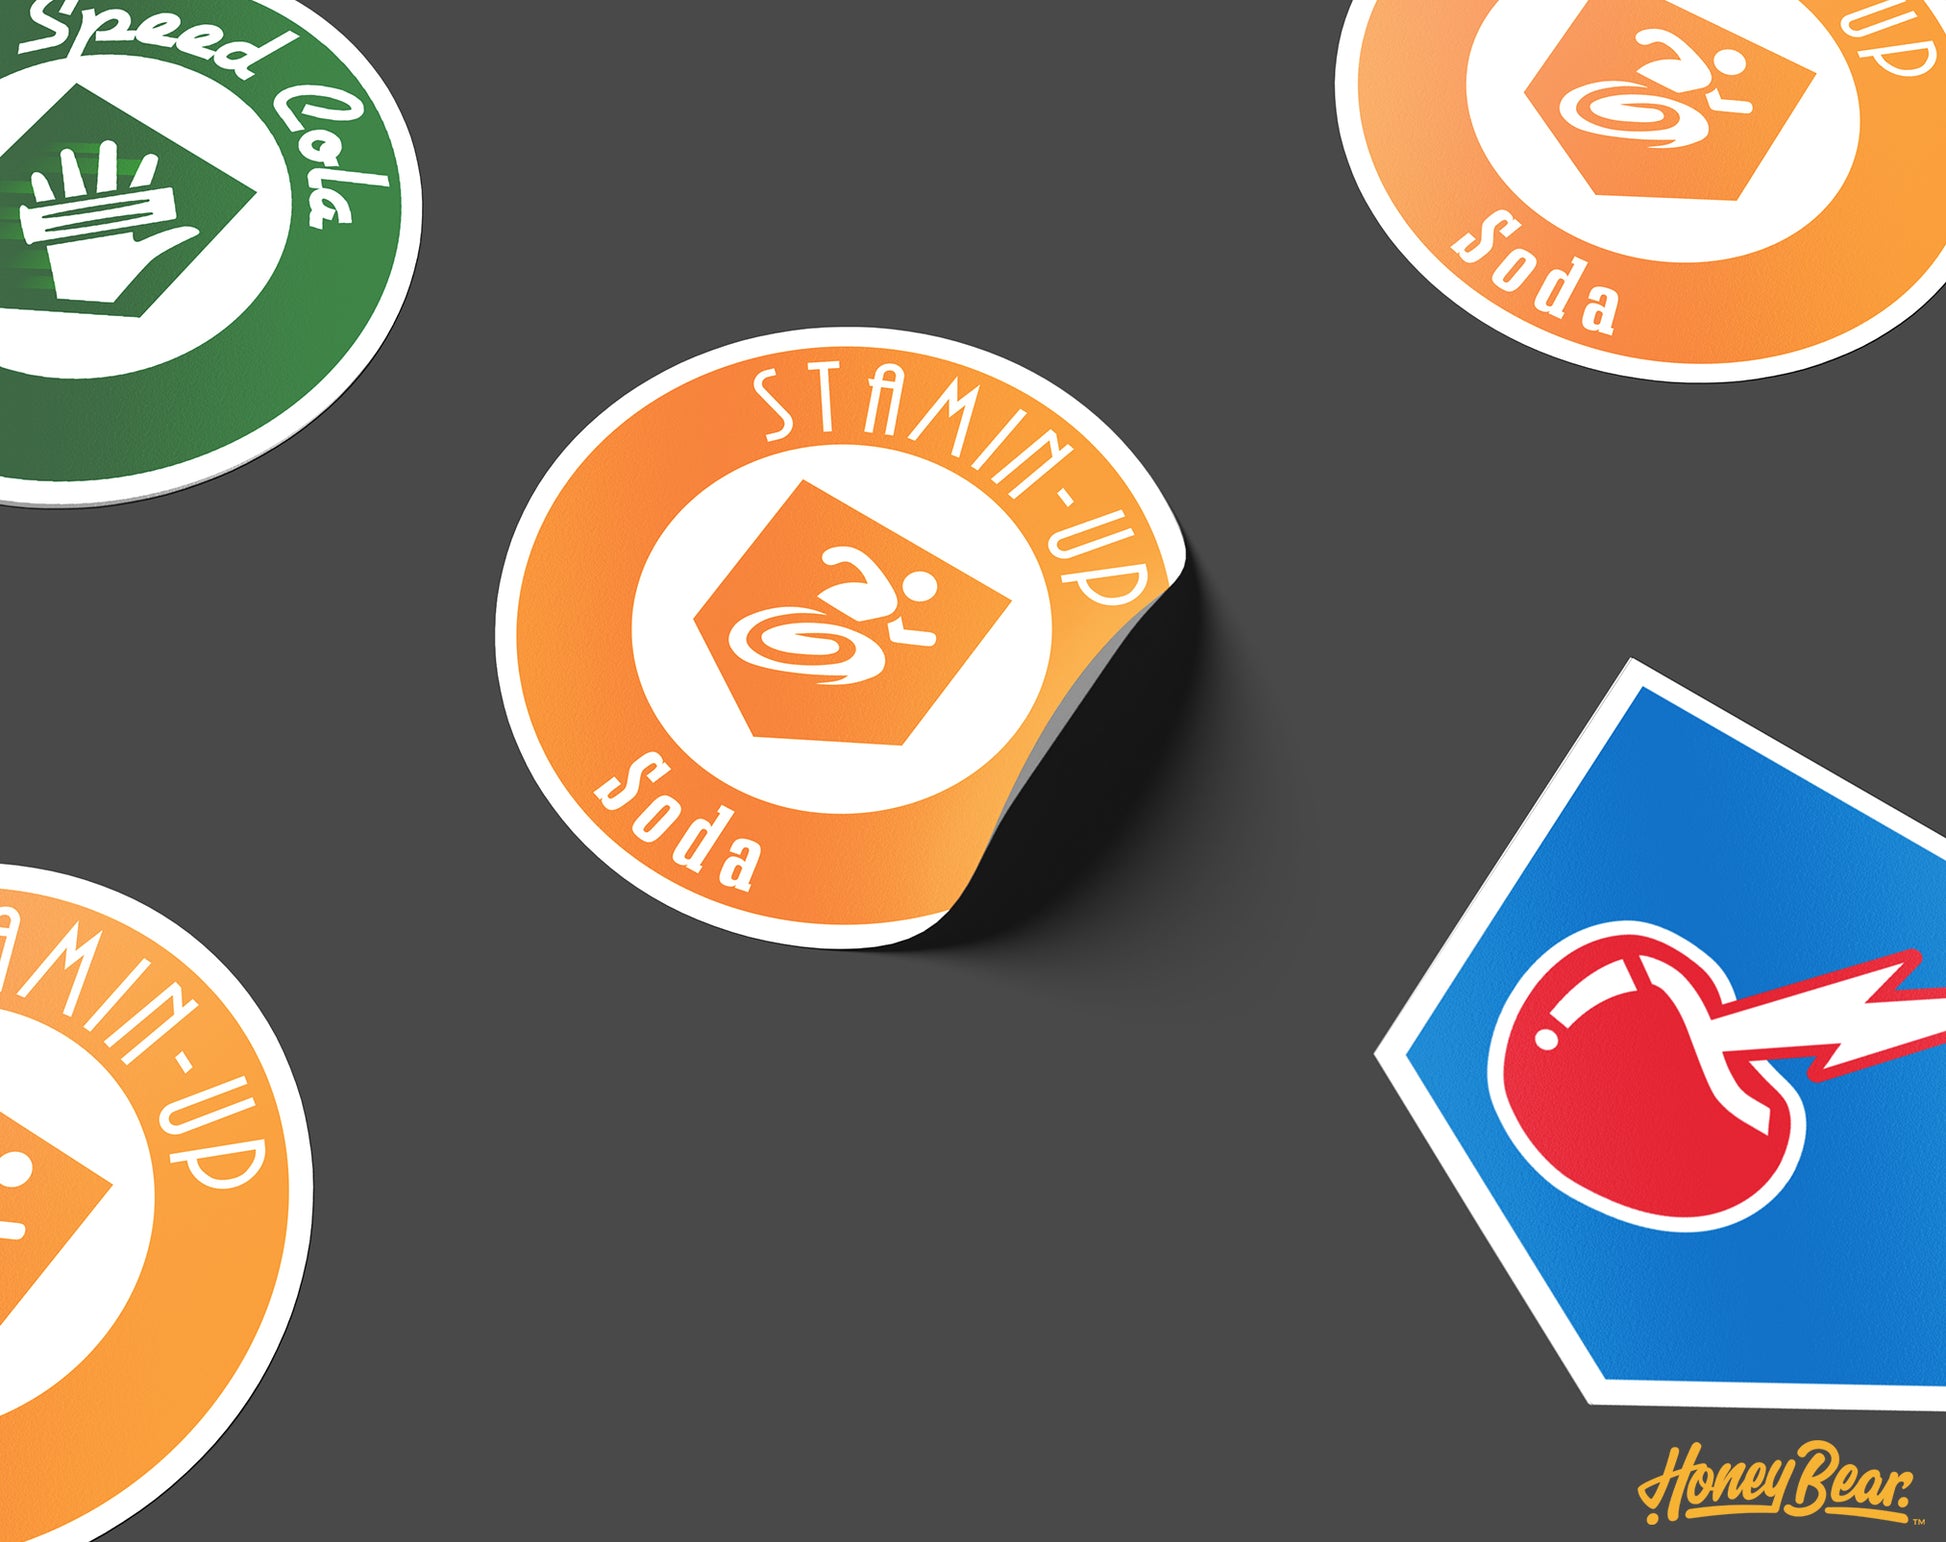 Set of retro-themed vinyl stickers, capturing the essence of zombie gaming strategy and challenges.